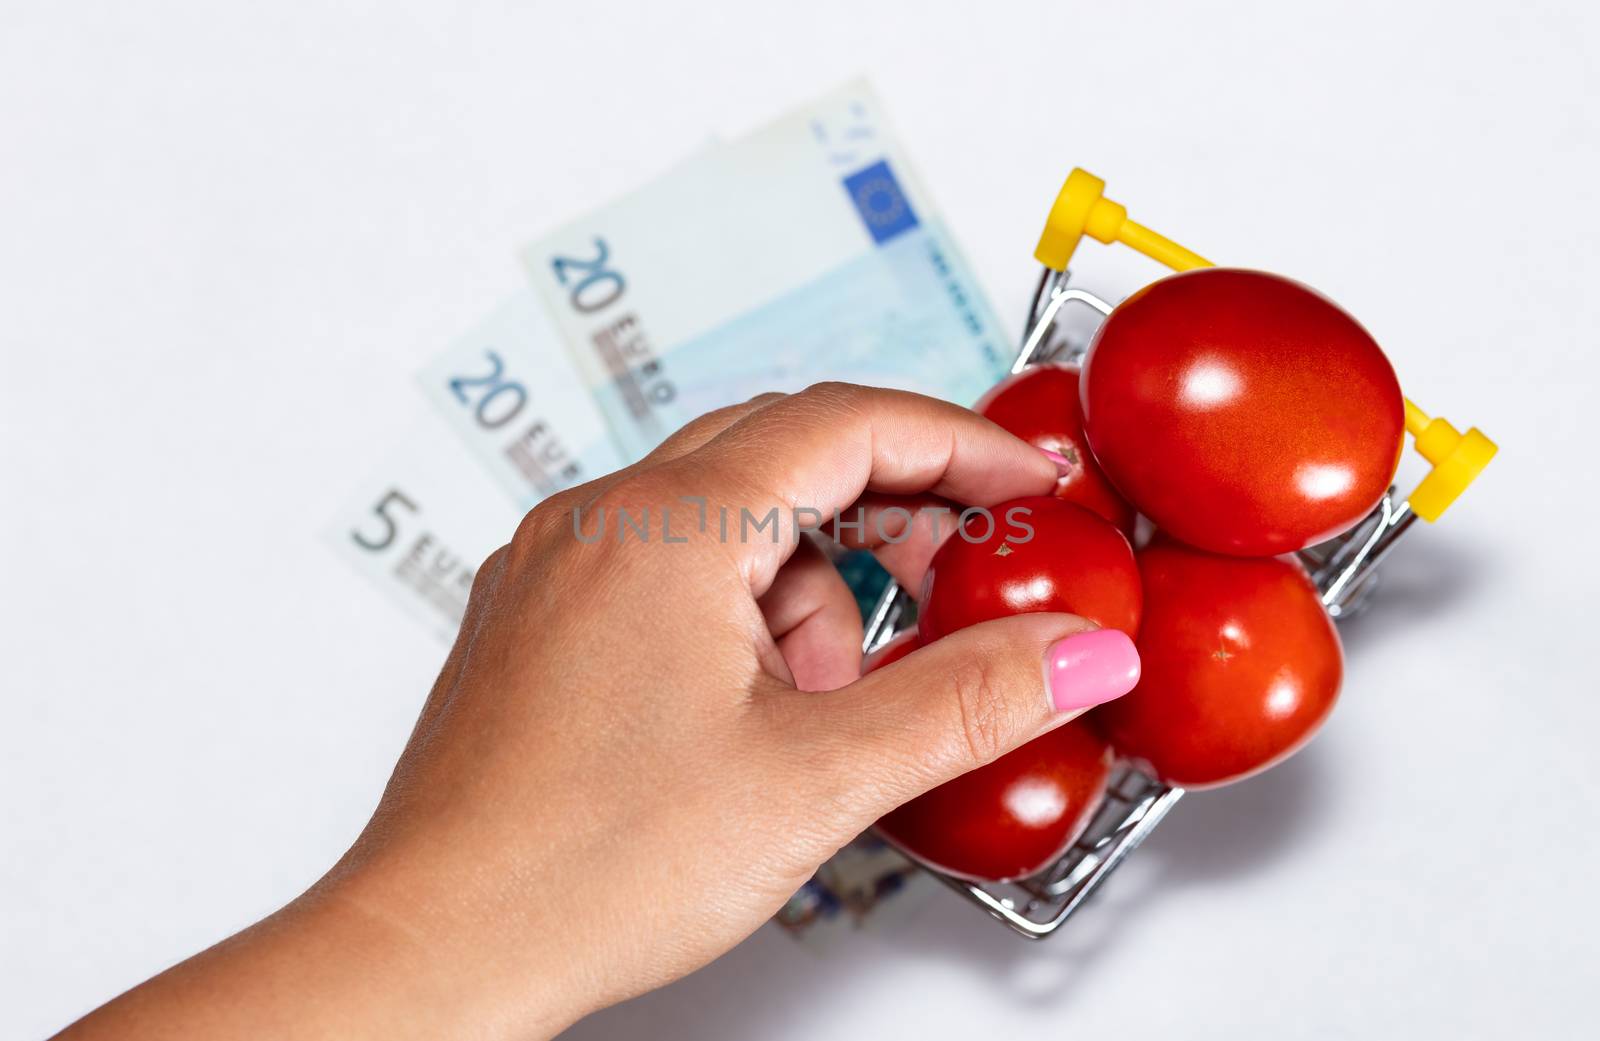 Shot of tomatoes in shopping cart isolated on white background with euro bills under it and womans hand reaching for tomato. Ripe tasty red tomatos in shopping cart. Top view. by DamantisZ